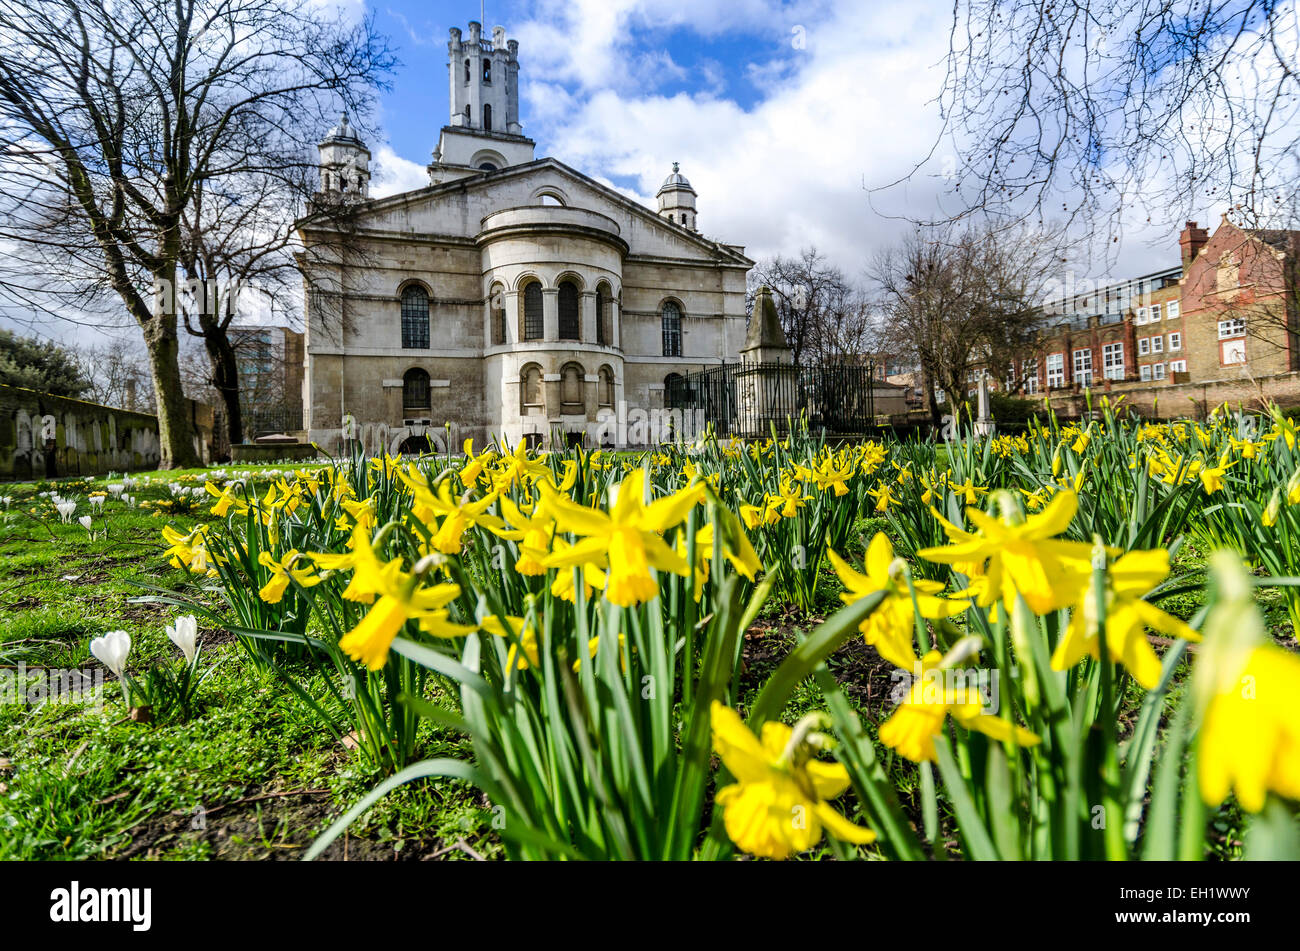 Bright yellow spring flowers (daffodils) in front of St George in the East church in Stepney, East London Stock Photo